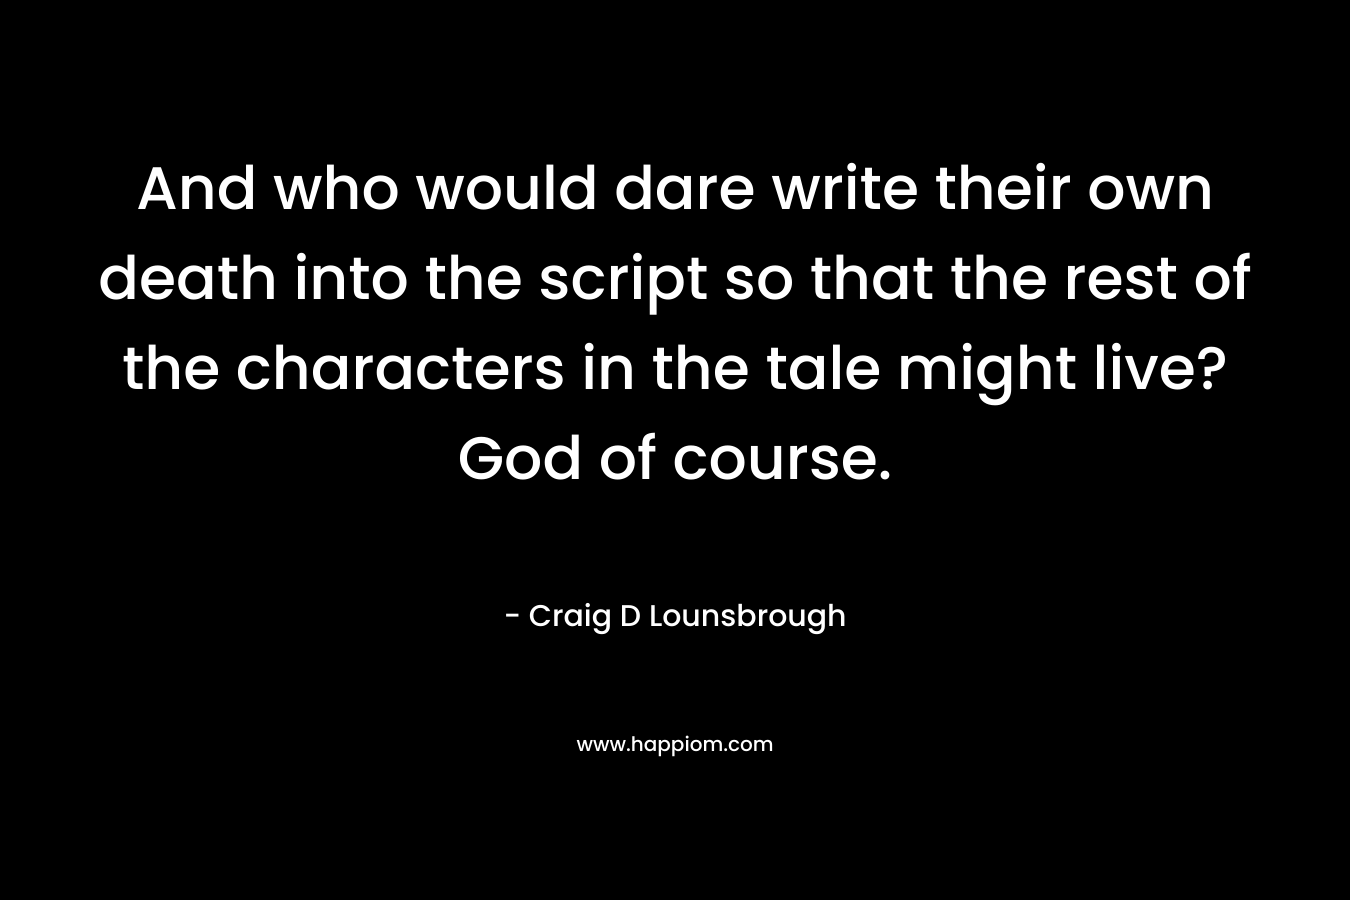 And who would dare write their own death into the script so that the rest of the characters in the tale might live? God of course.